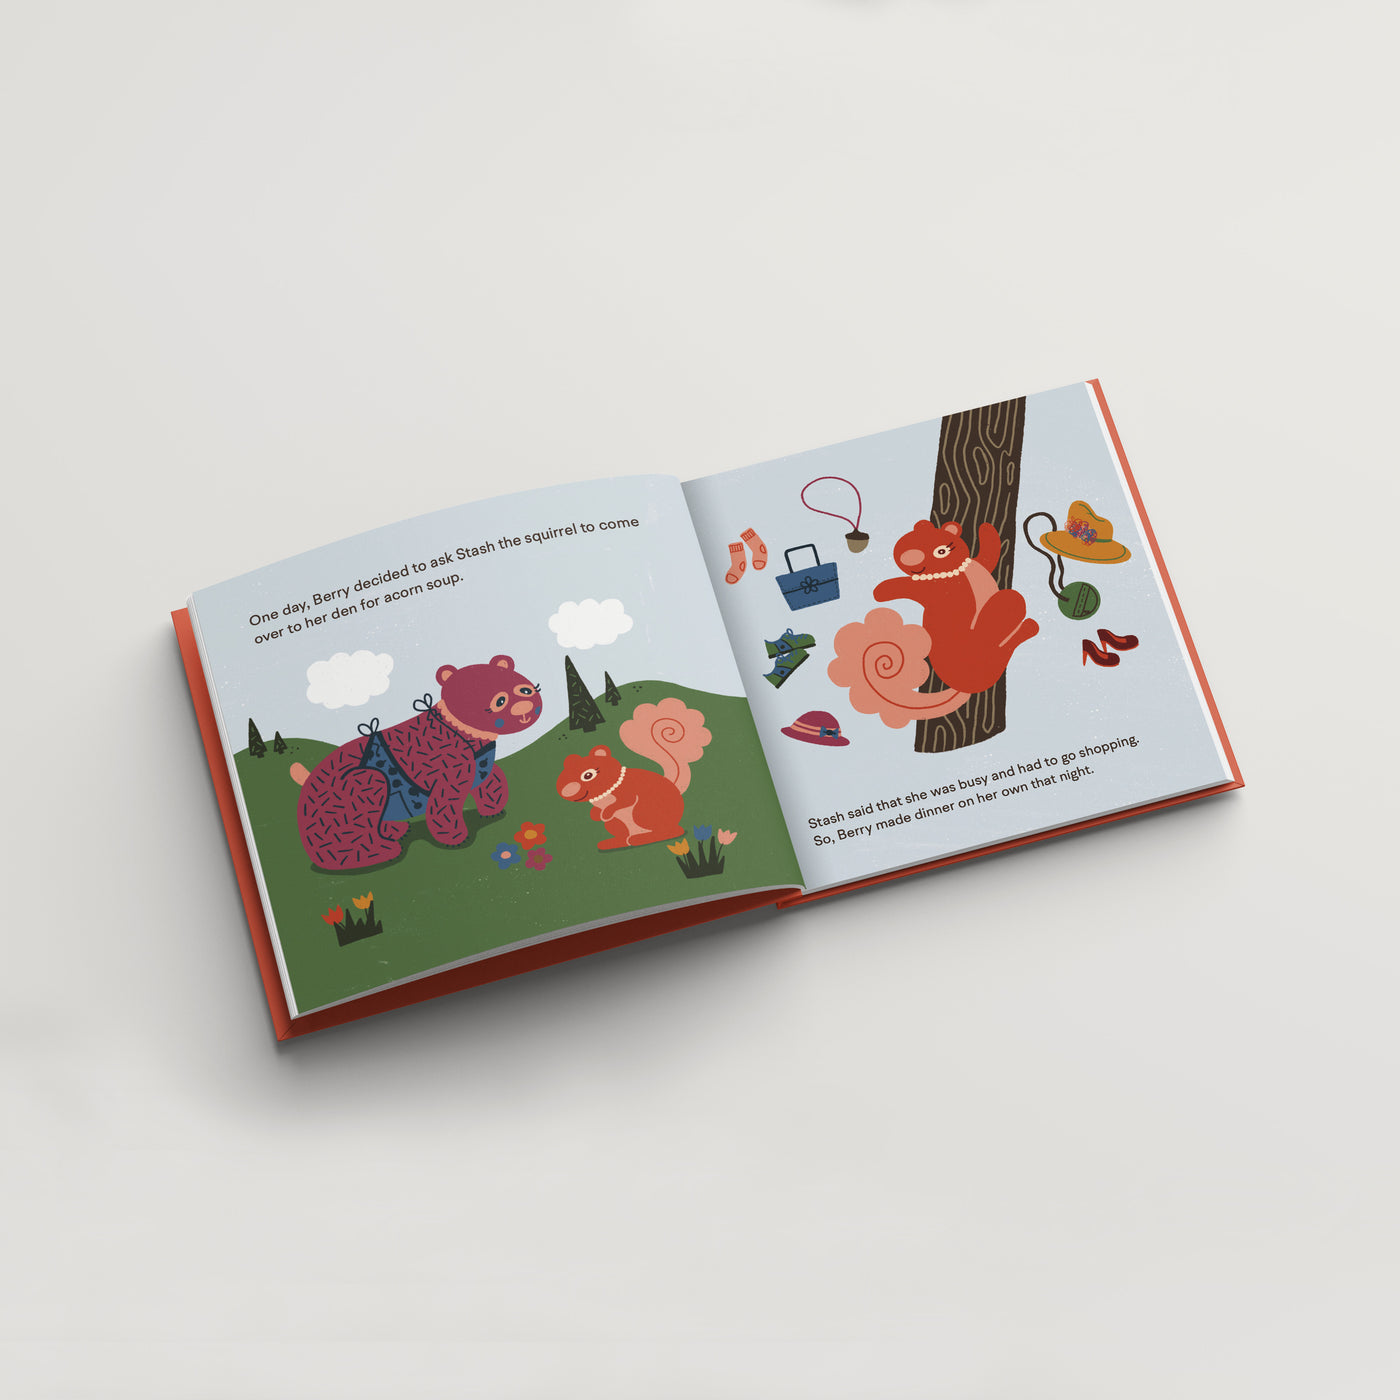 spread of interior of "Berry's Bash" book, Berry is talking to Stash the squirrel